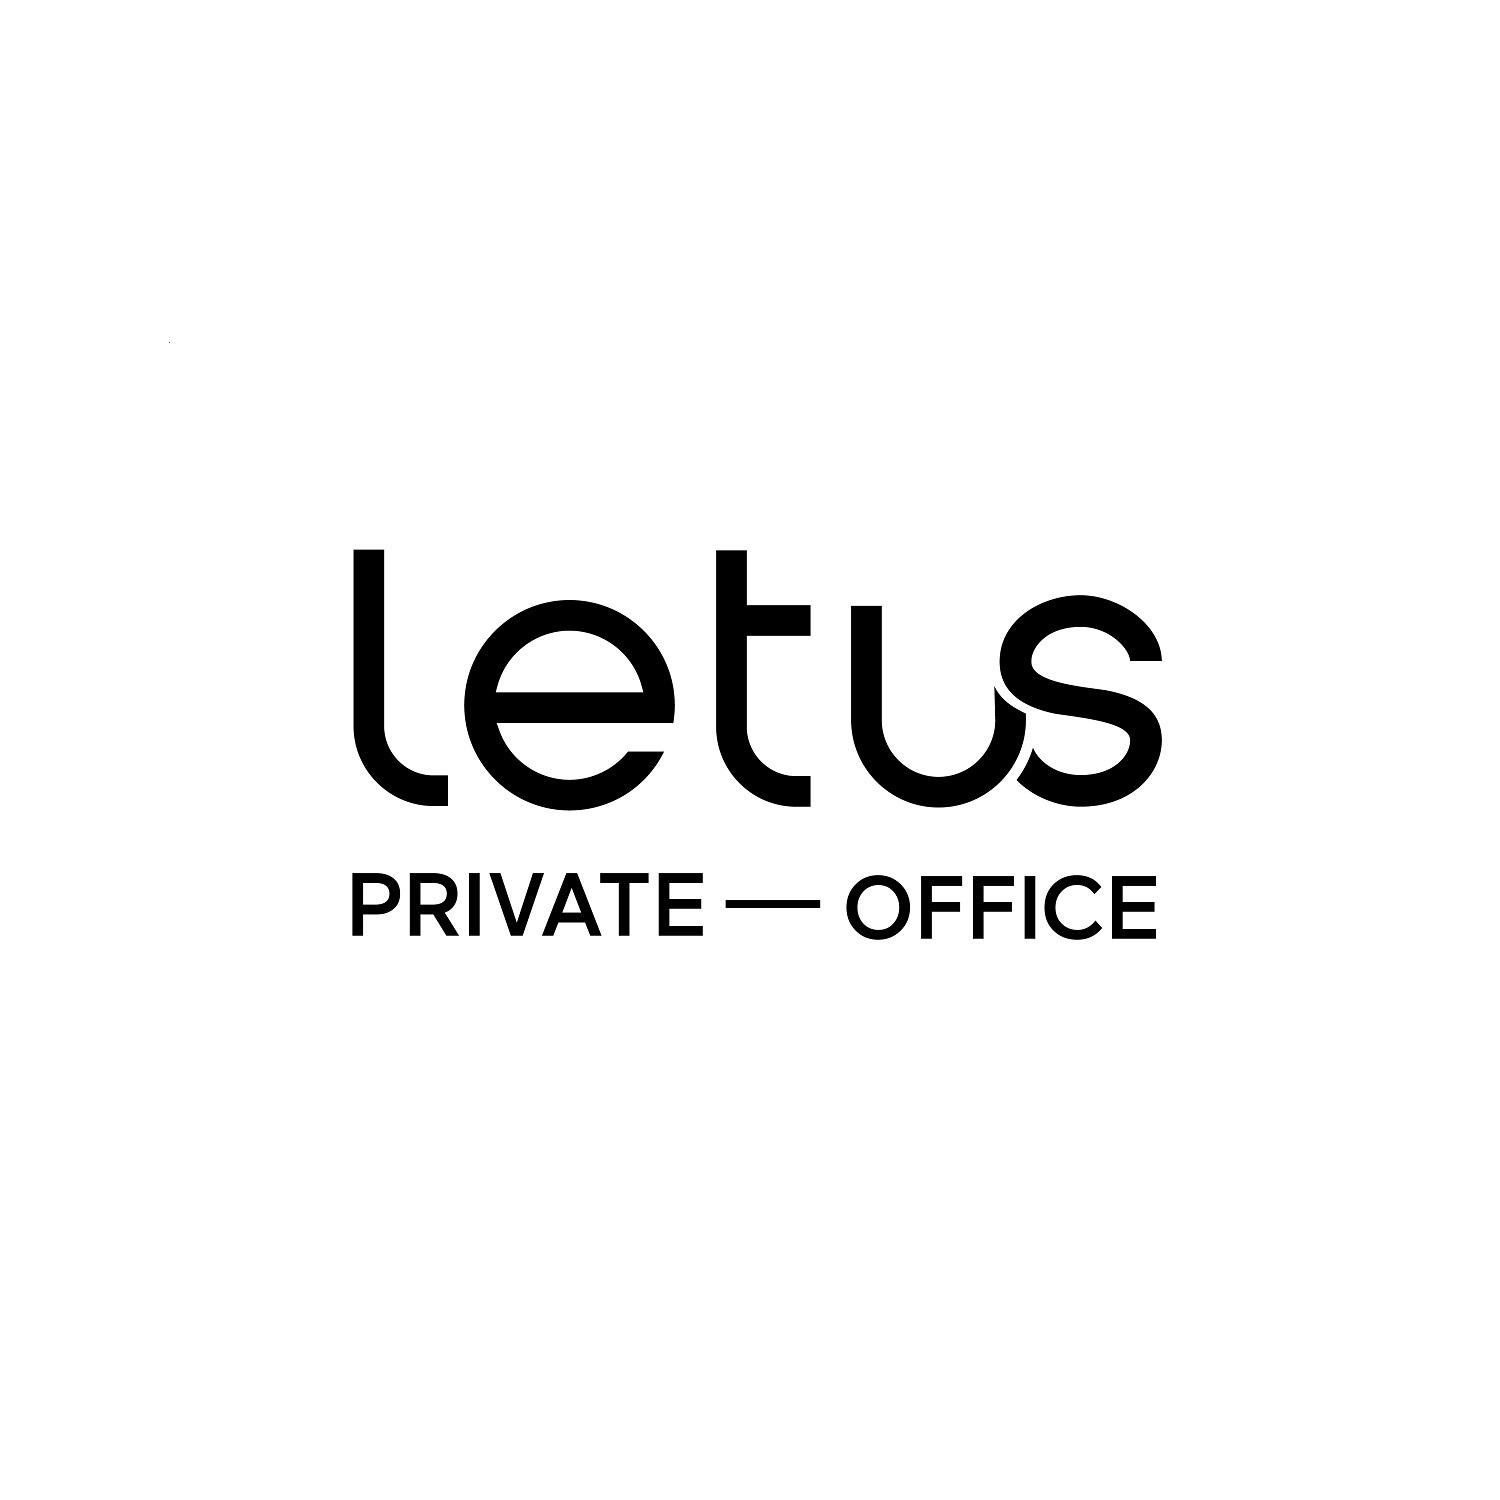 Letus Private Office